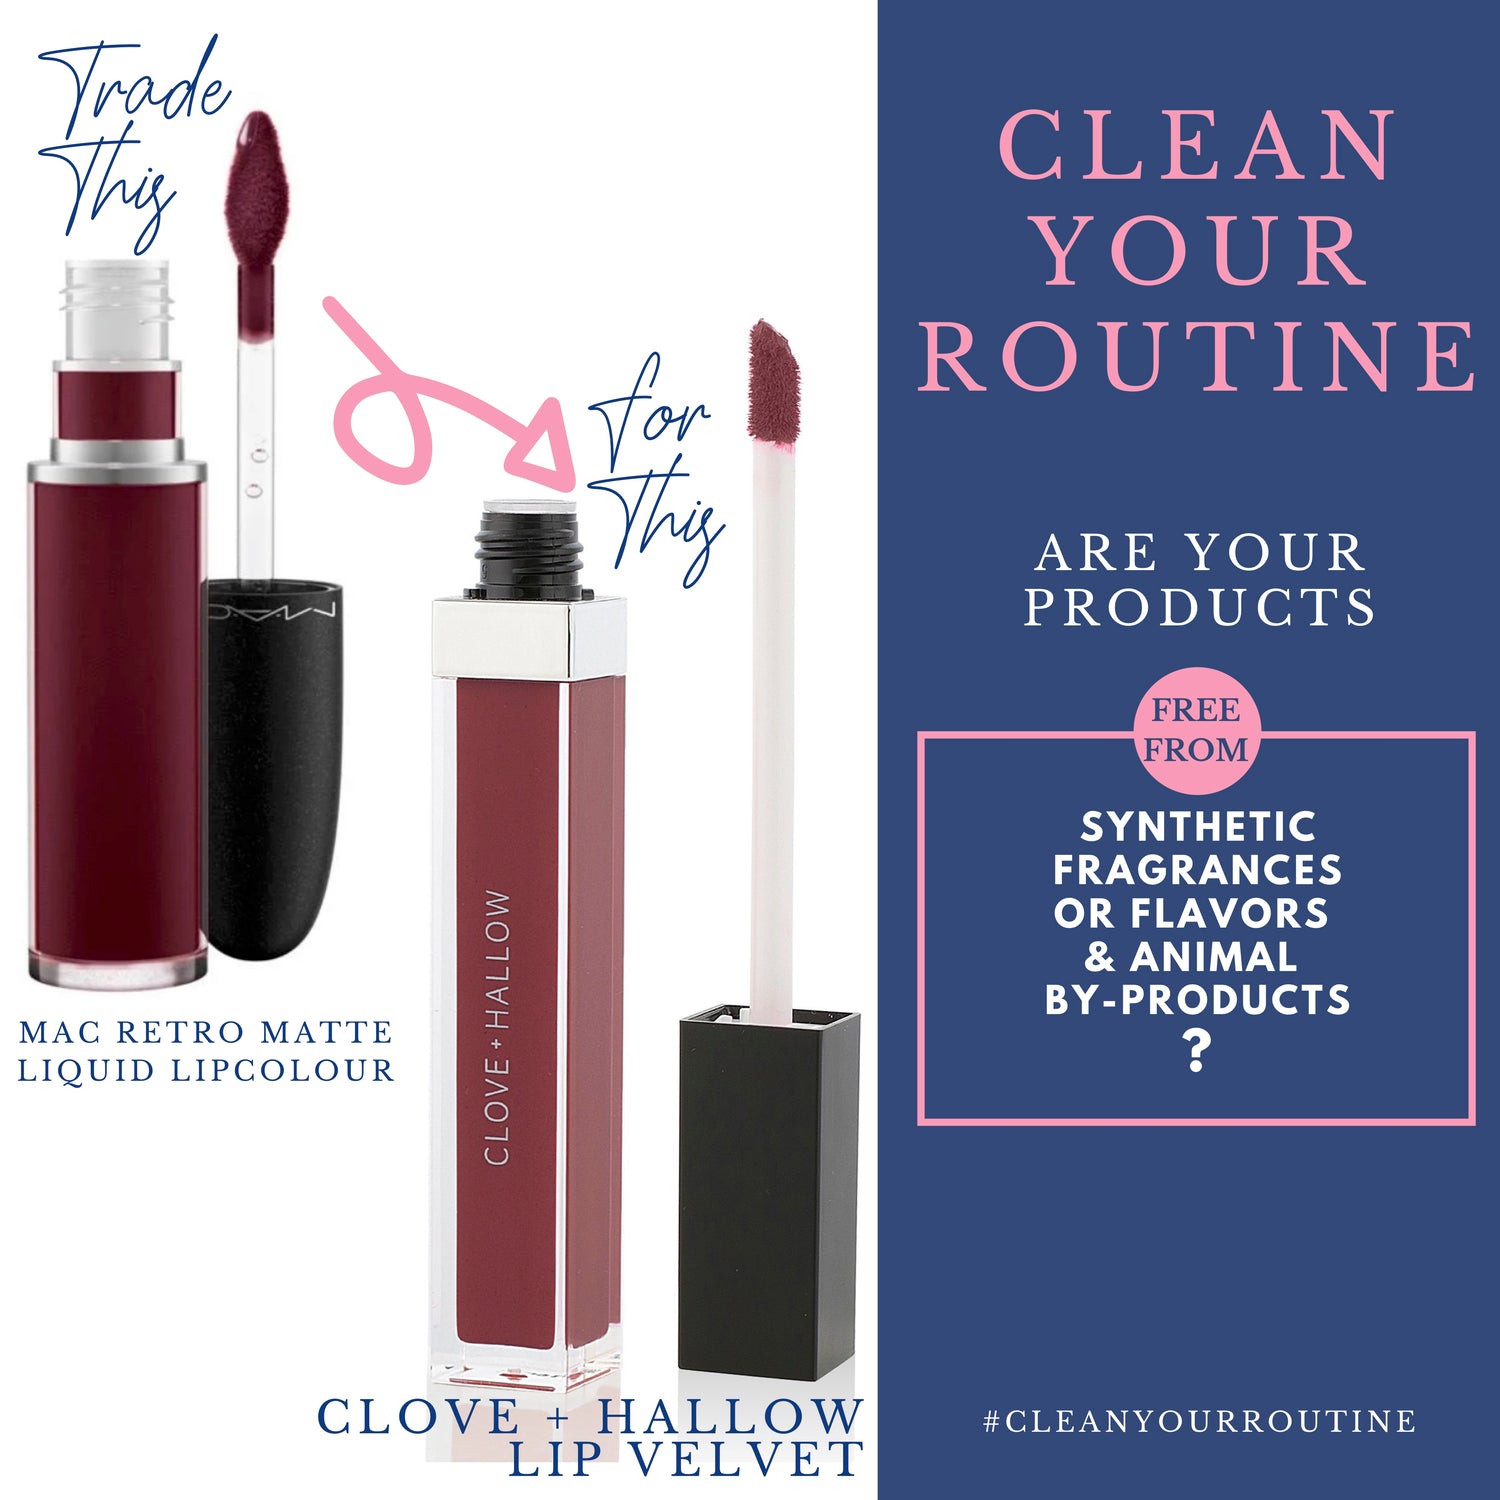 trade mac retro matte liquid lip colour for clove and hallow lip velvet. clean your routine: are your products free from synthetic fragrances or flavors and animal by-products? 